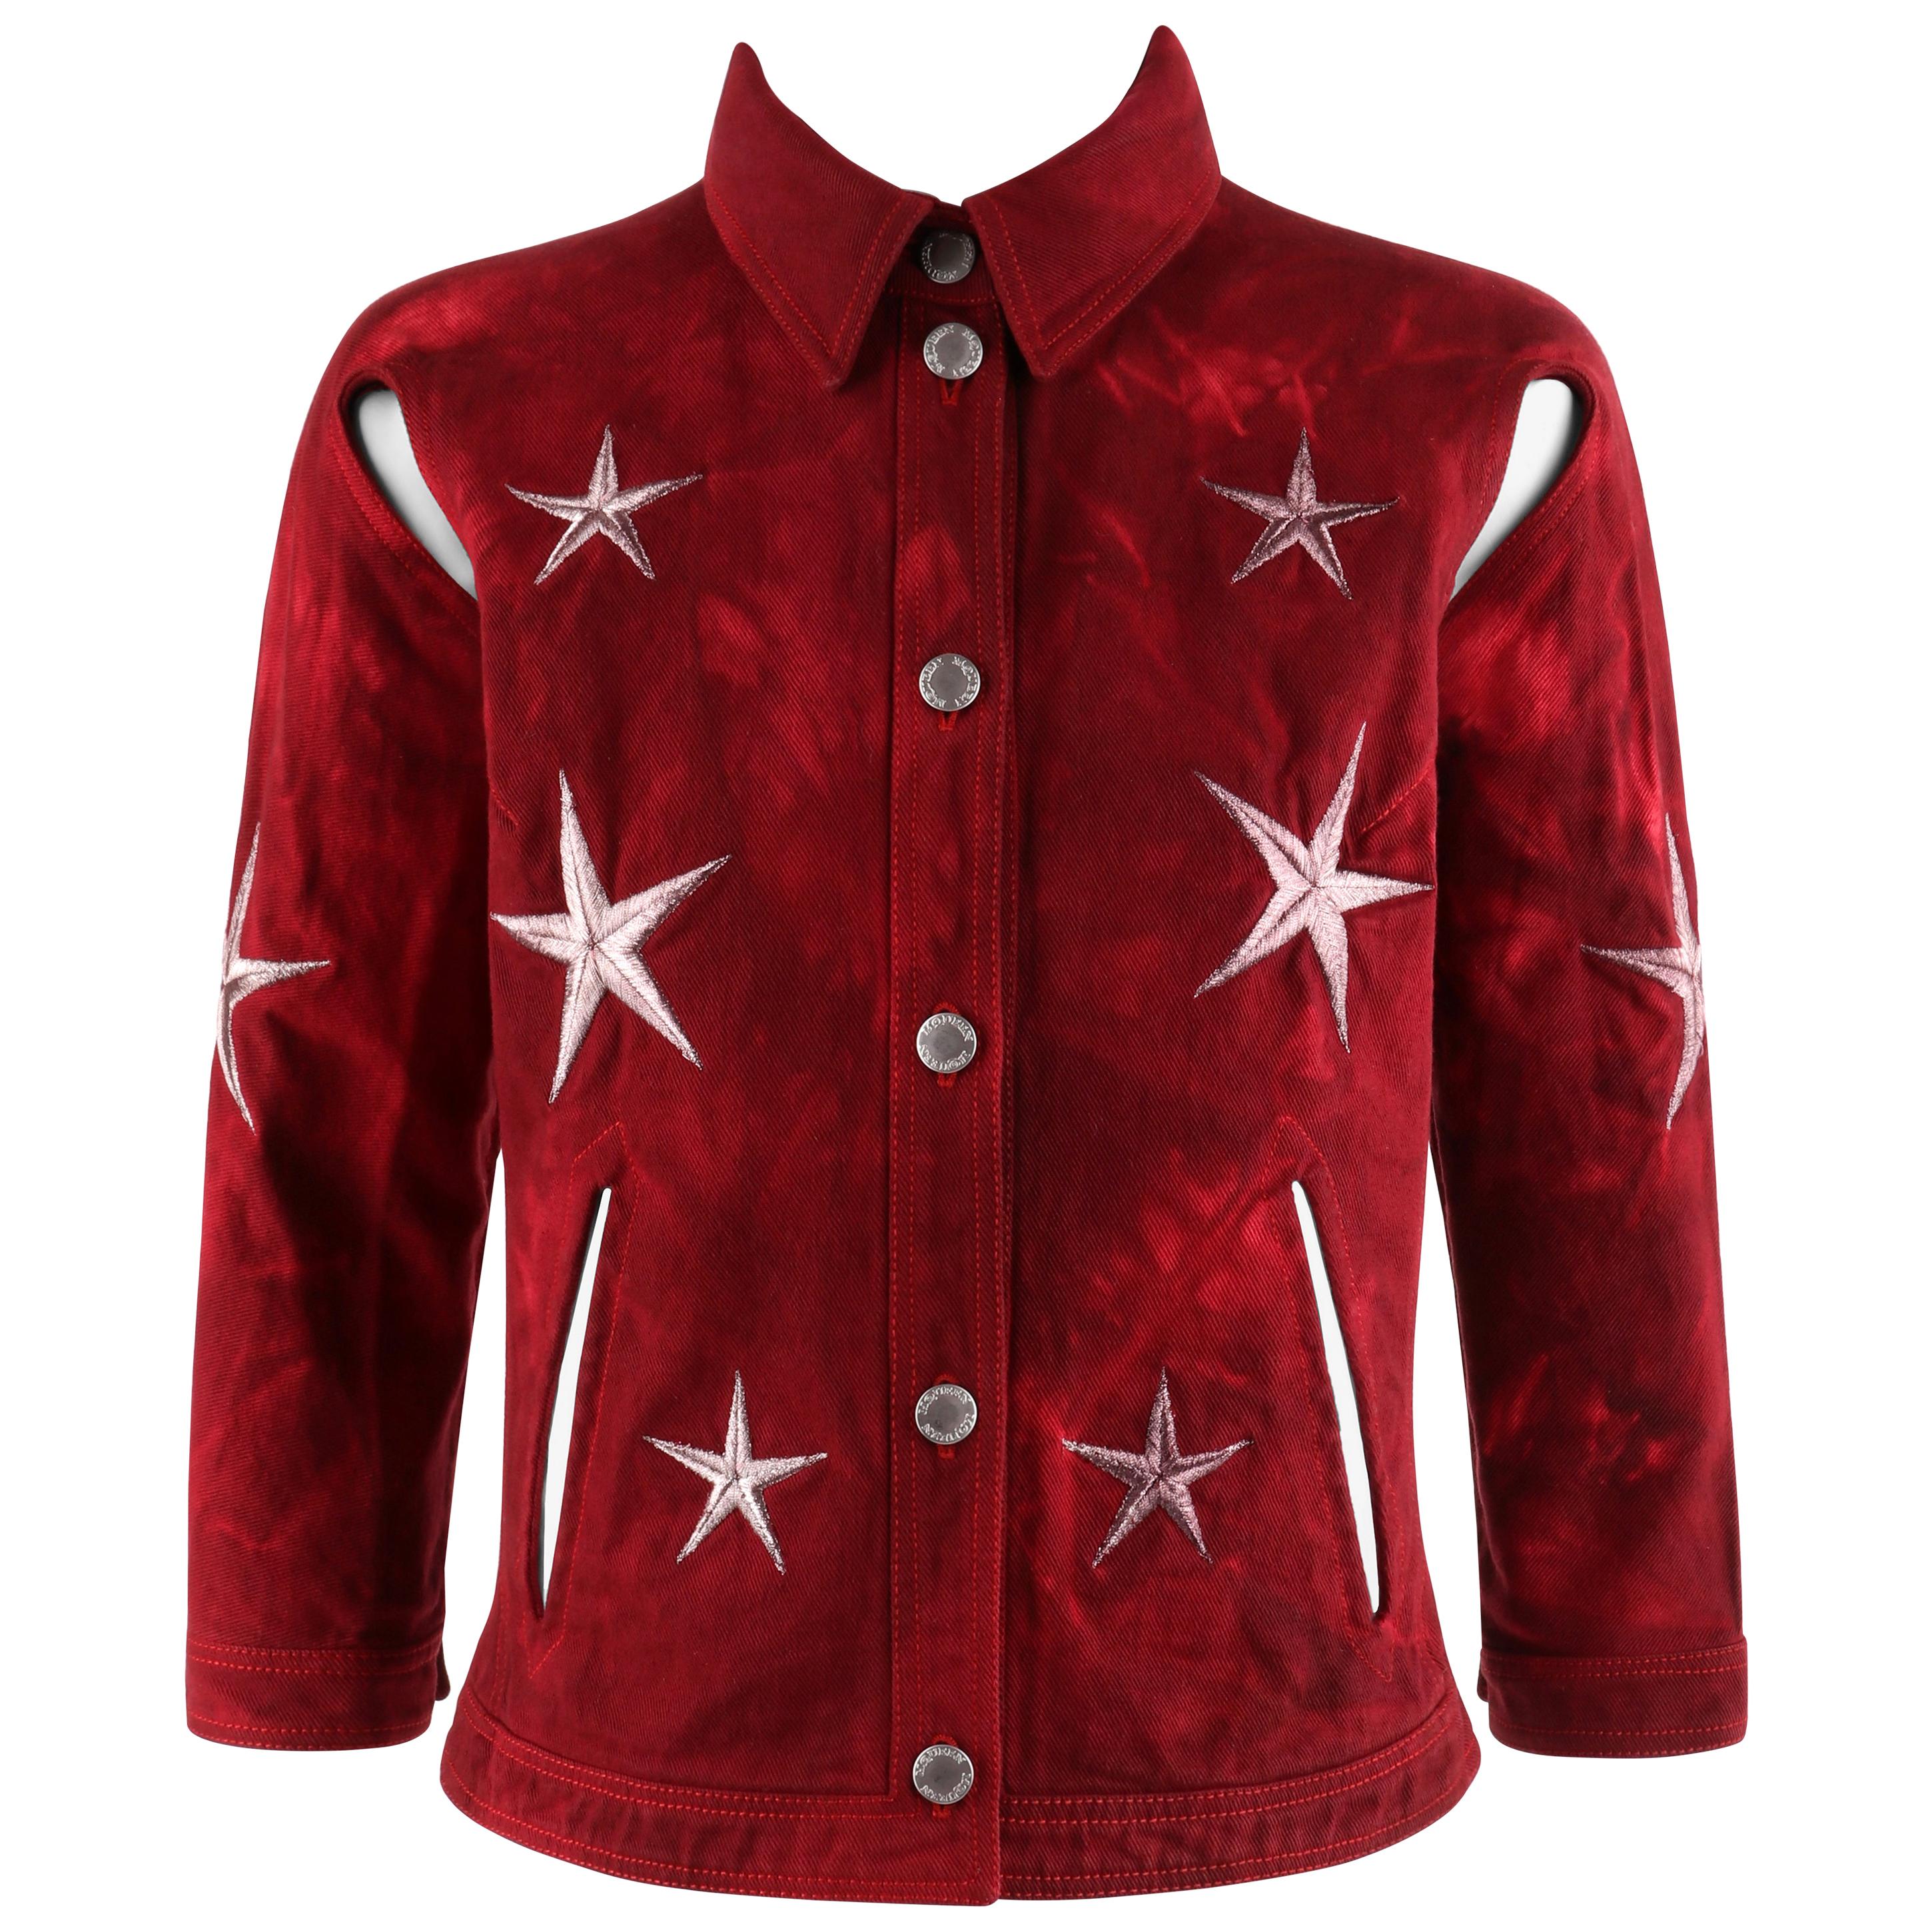 ALEXANDER McQUEEN S/S 2000 “Eye” Star Embroidered Aesthetic Denim Cutout Jacket For Sale